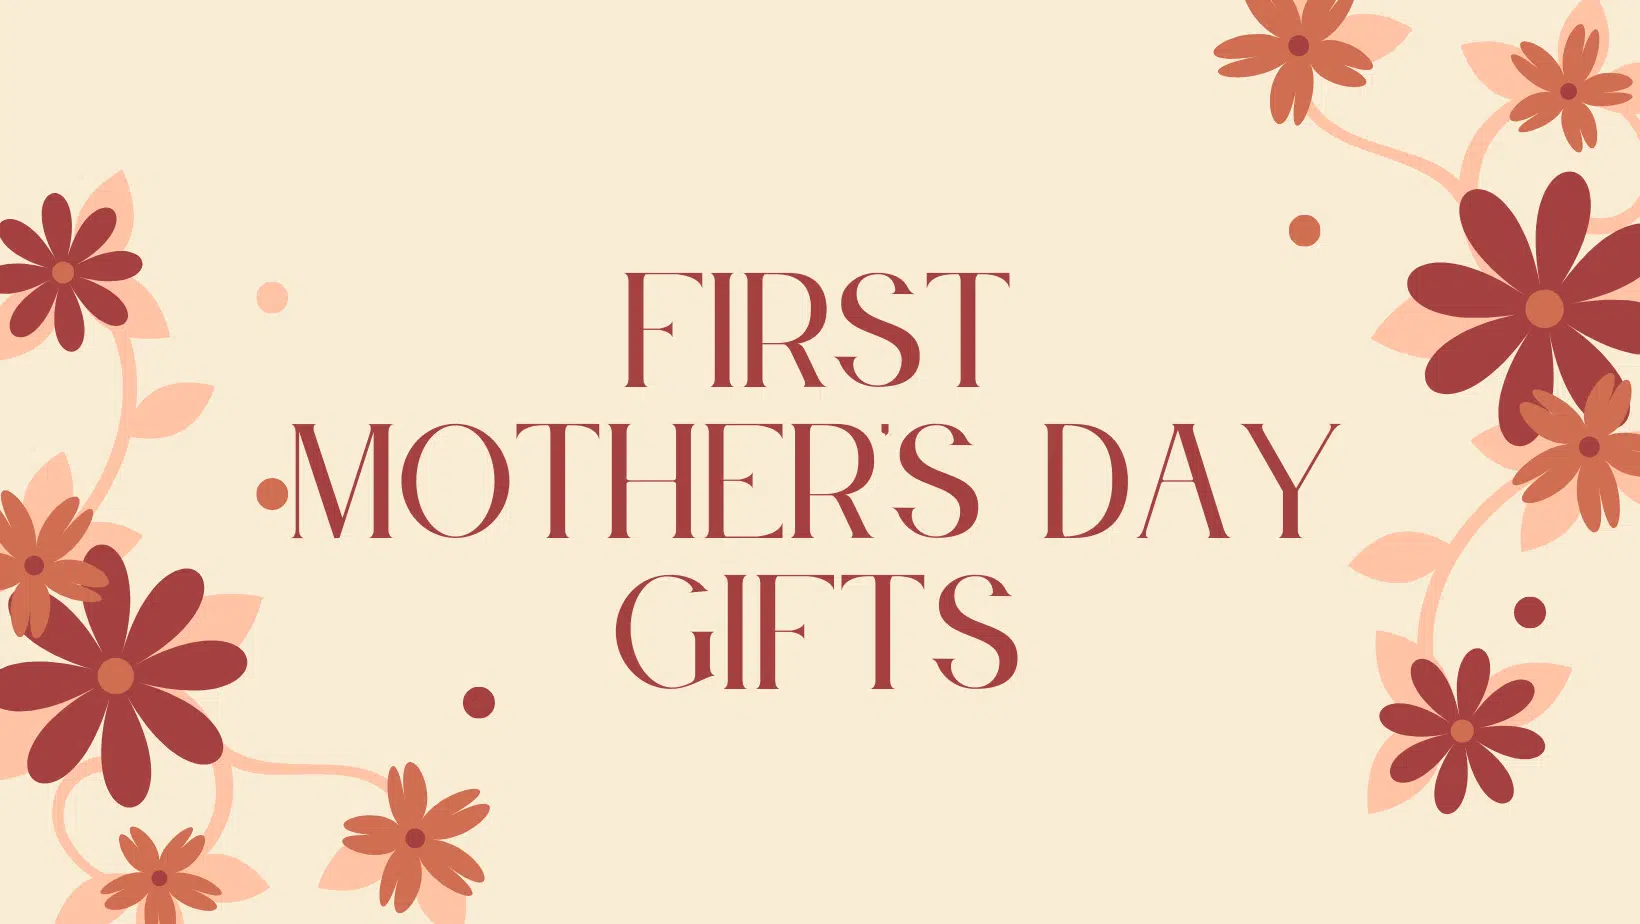 First Mothers Day Gifts - Cover Image